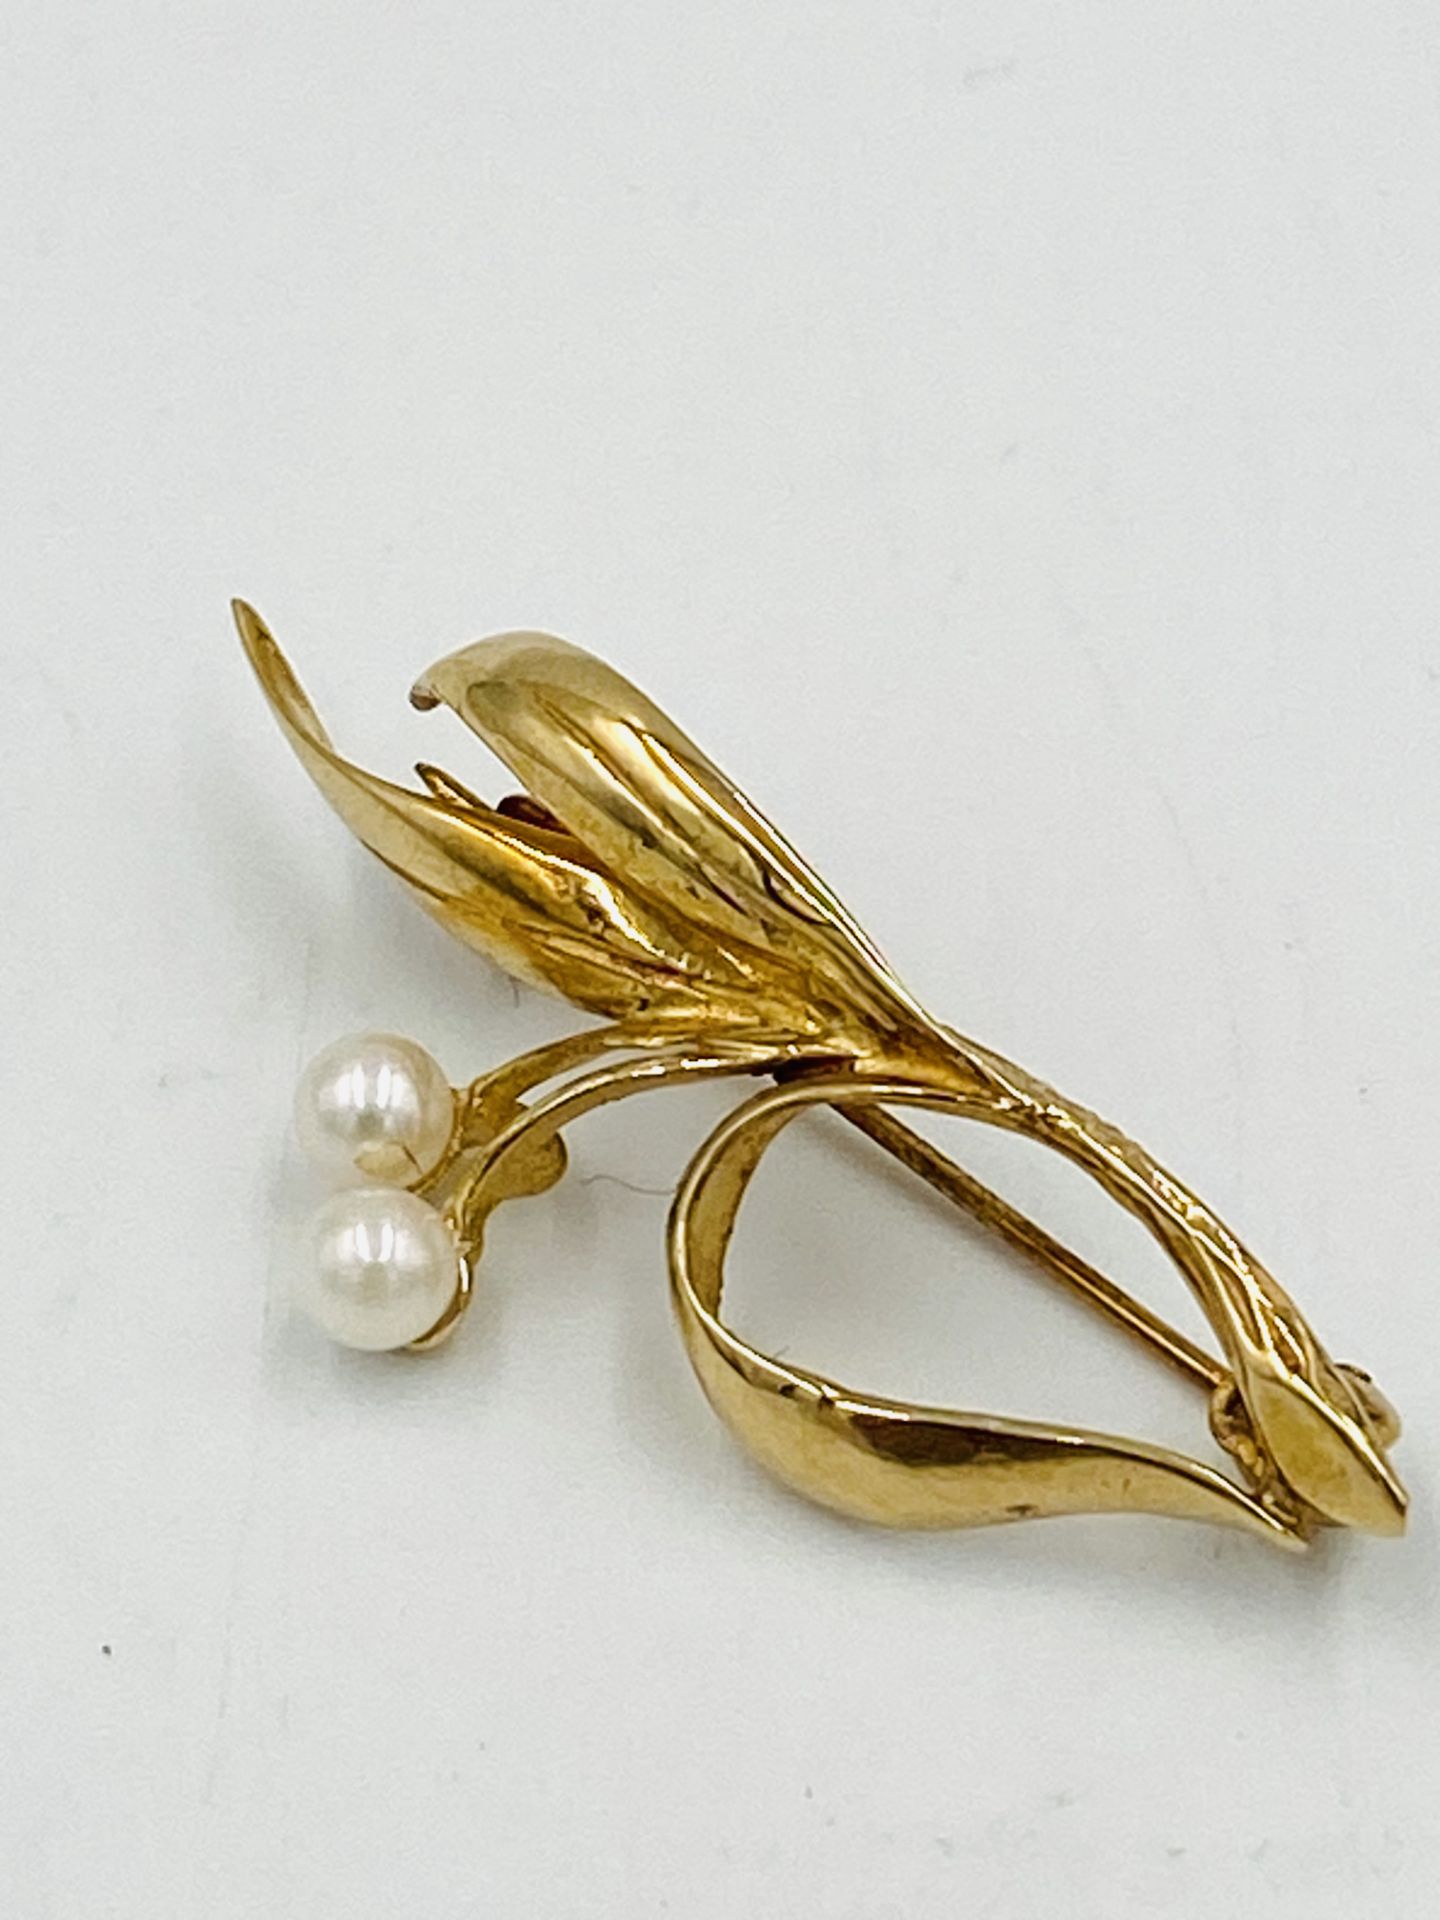 9ct gold brooch set with two pearls - Image 2 of 3